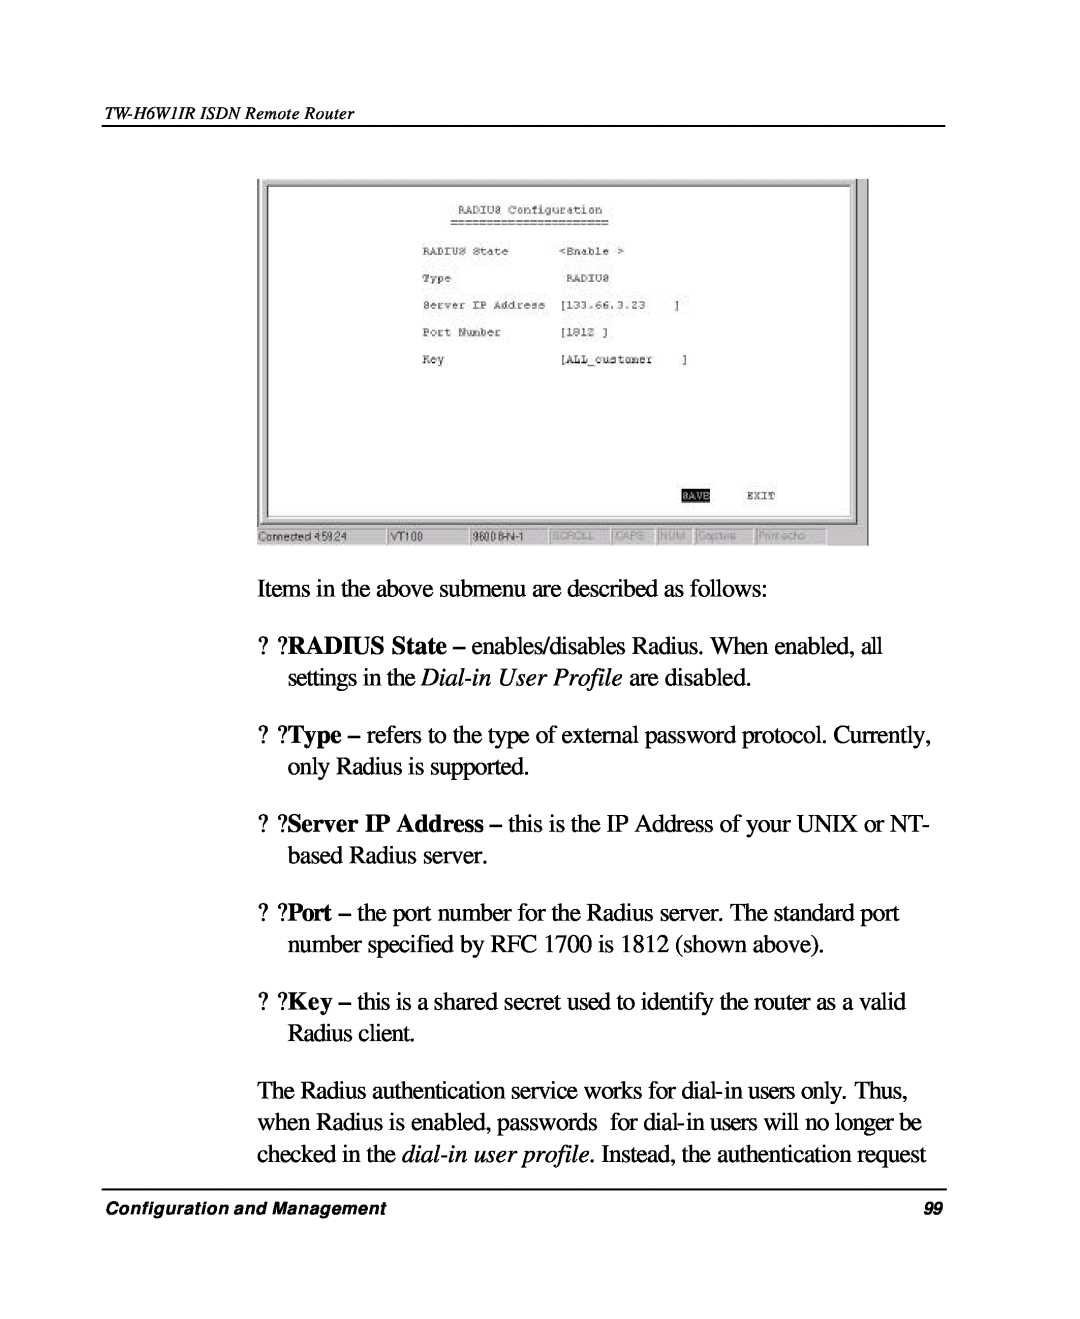 TRENDnet TW-H6W1IR manual Items in the above submenu are described as follows 